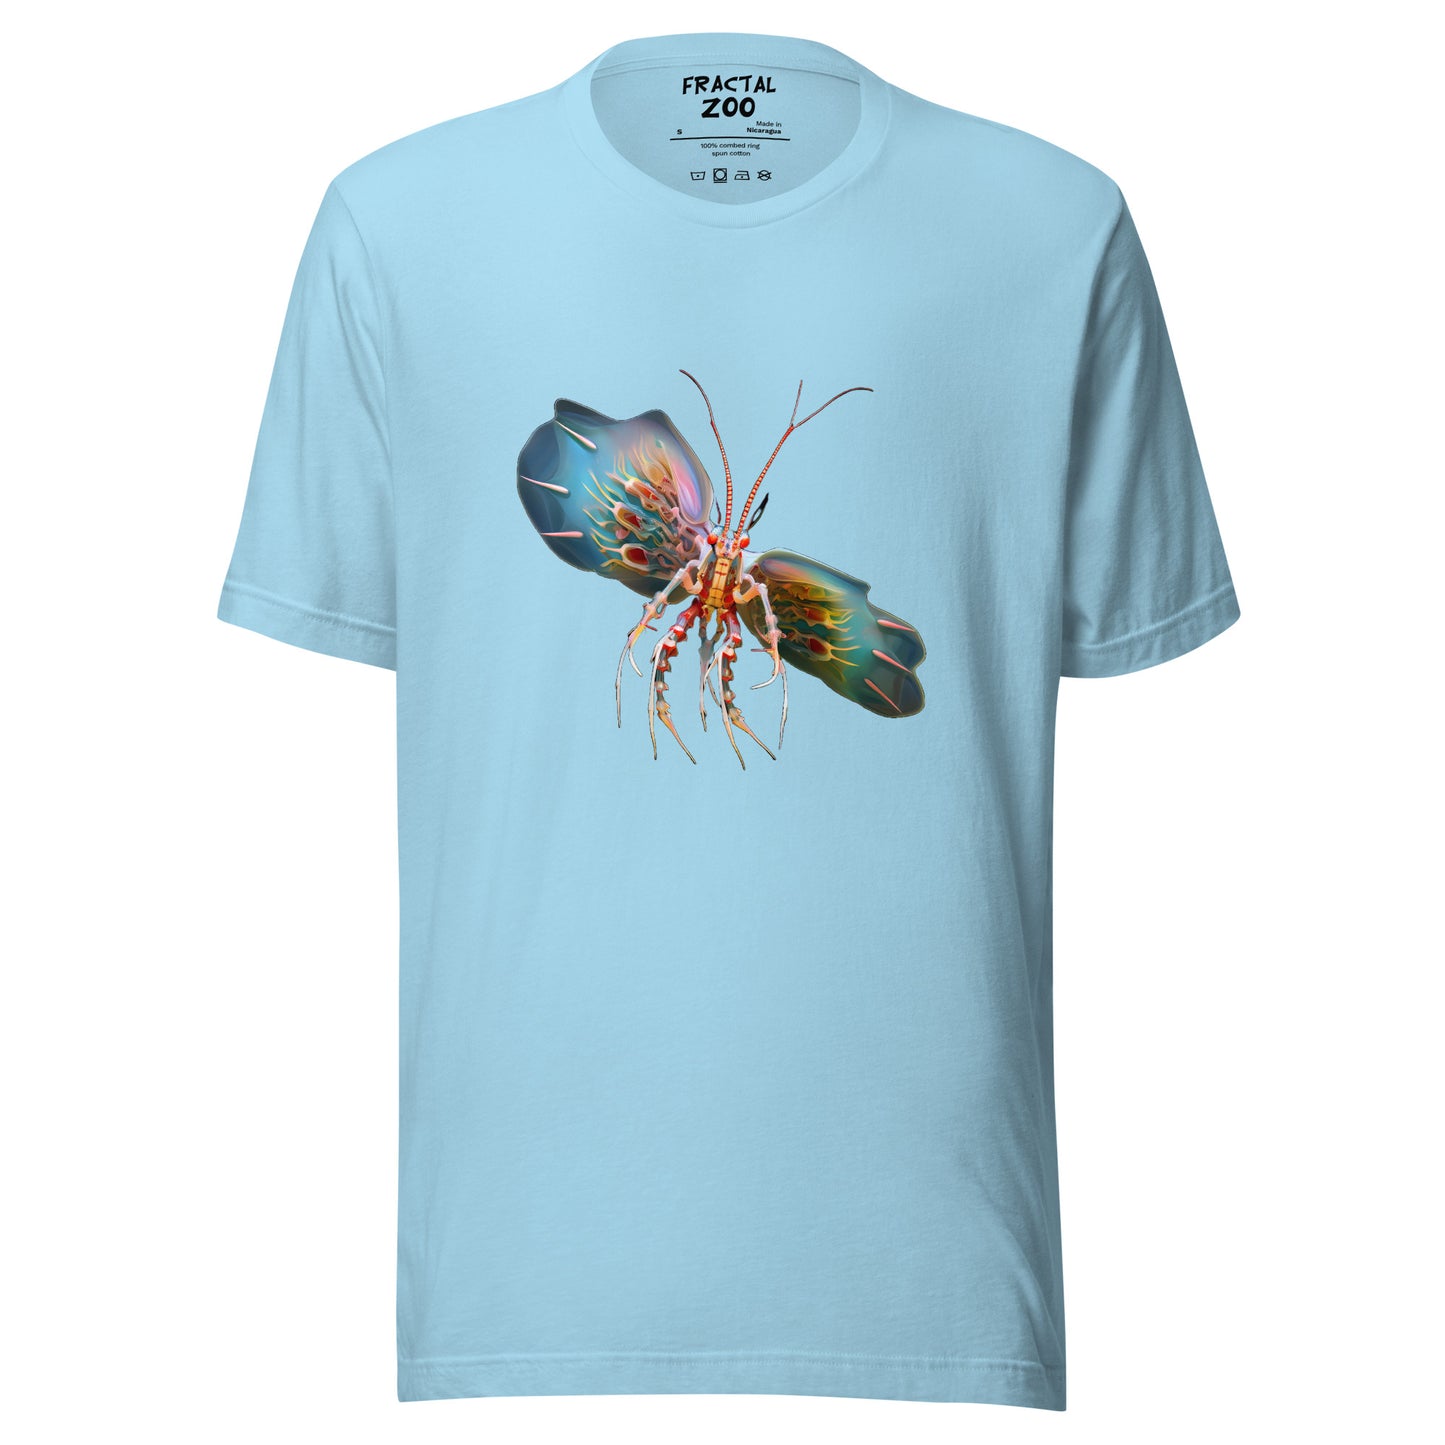 Fly into the Surreal with the Flying Fractal Mantis T-Shirt where Art meets Nature